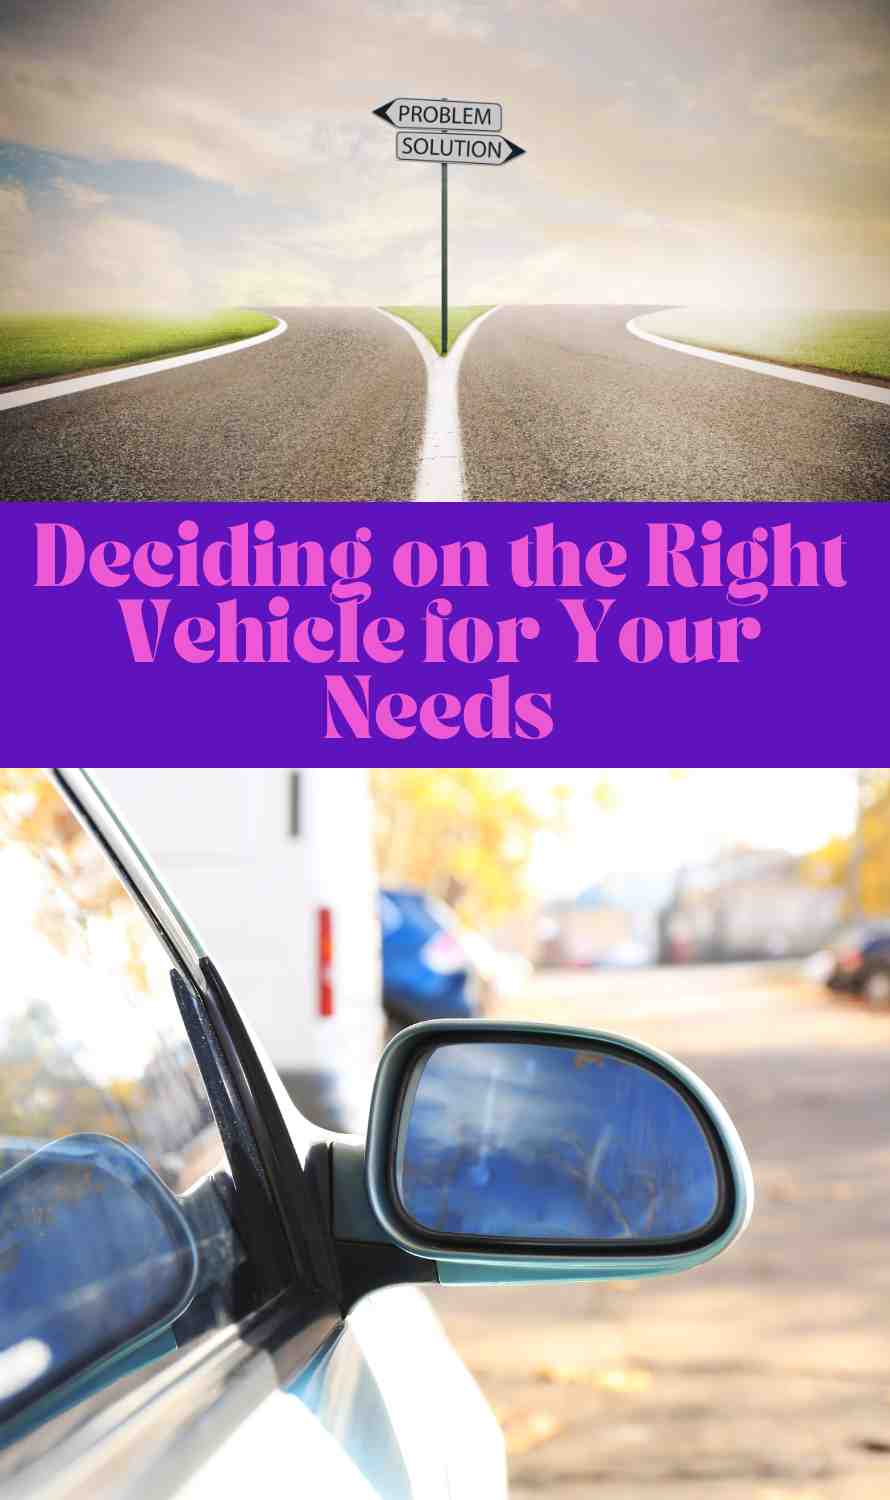 Deciding on the Right Vehicle for Your Needs